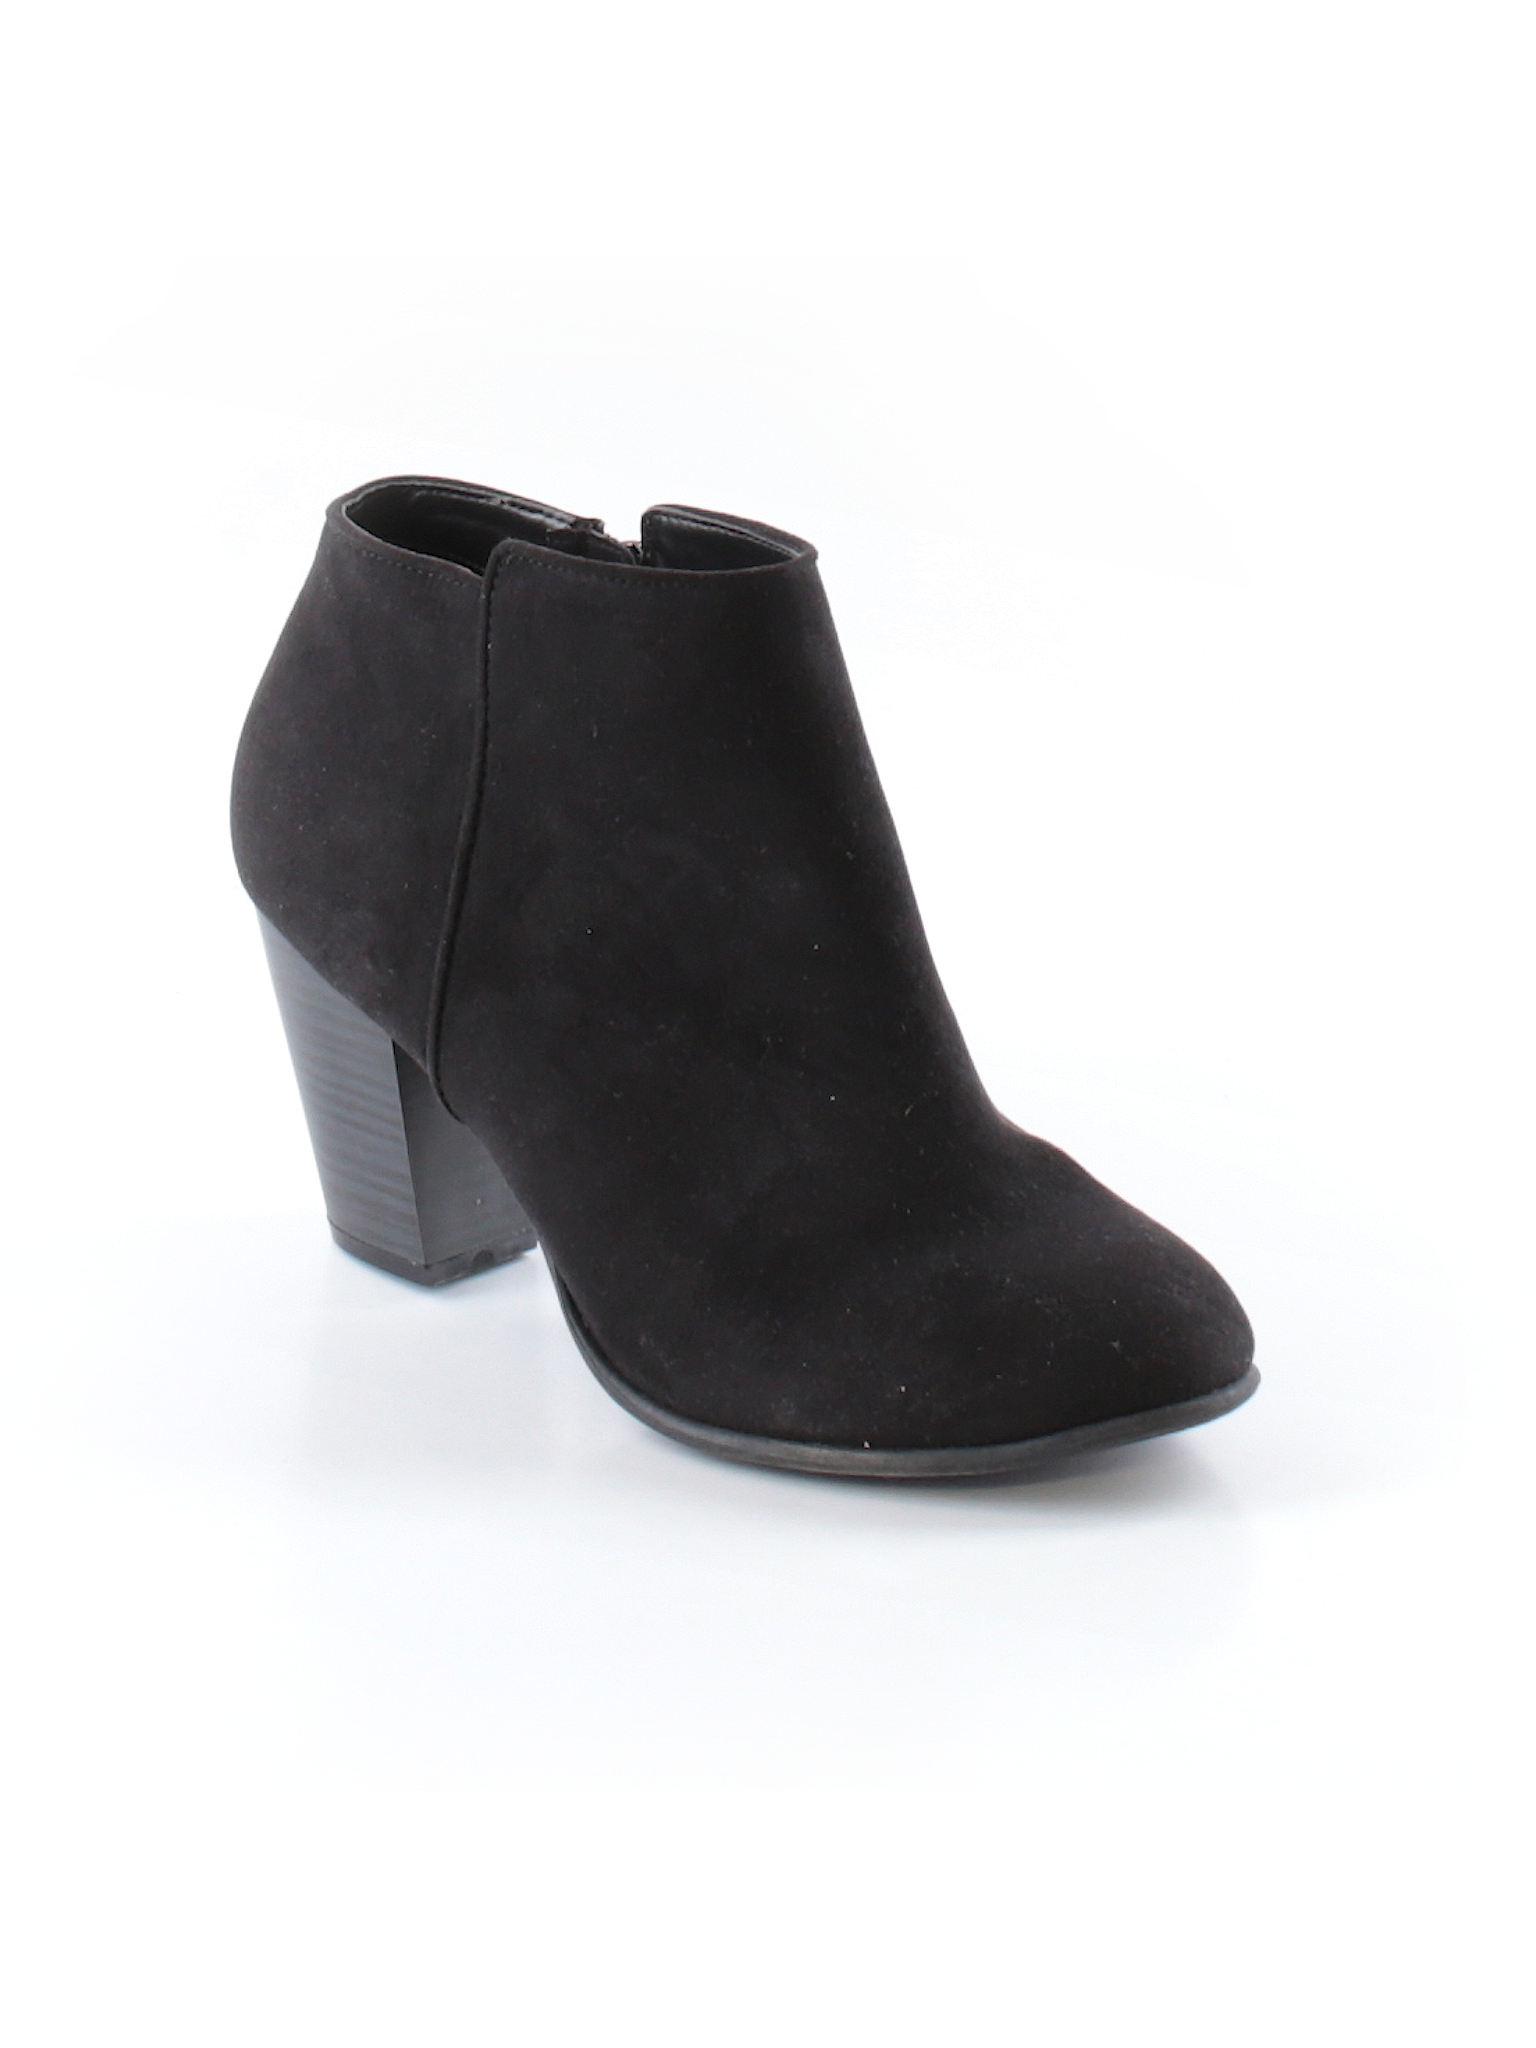 Old Navy Solid Black Ankle Boots Size 9 - 57% off | thredUP